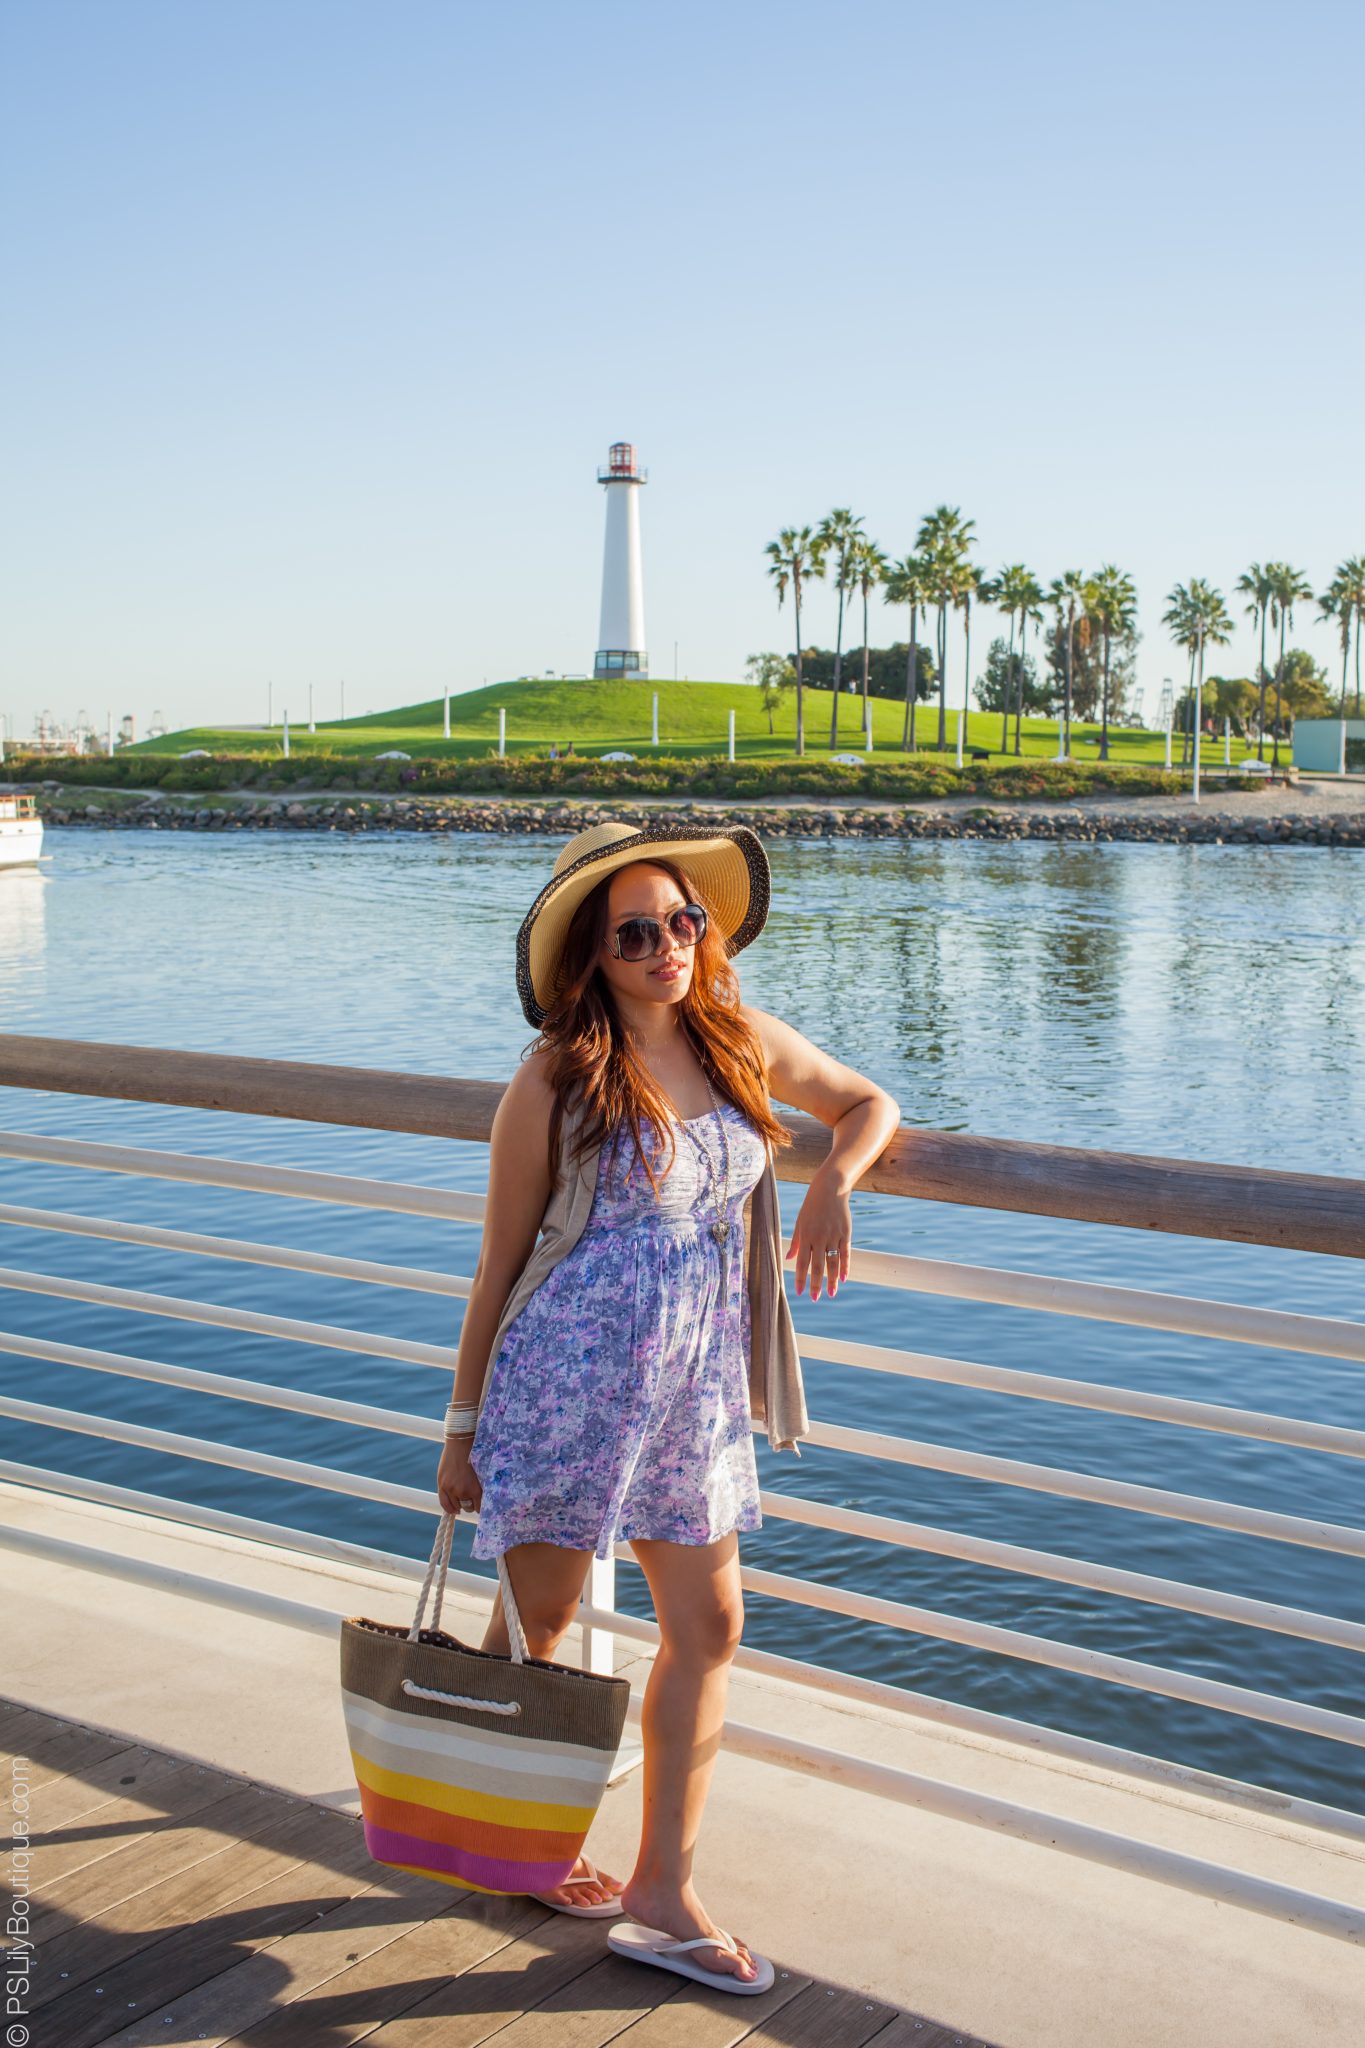 instagram-pslilyboutique-los-angeles-blogger-long-beach-lighthouse-water-palm-trees-style-blogger-ootd-casual-weekend-10-10-15